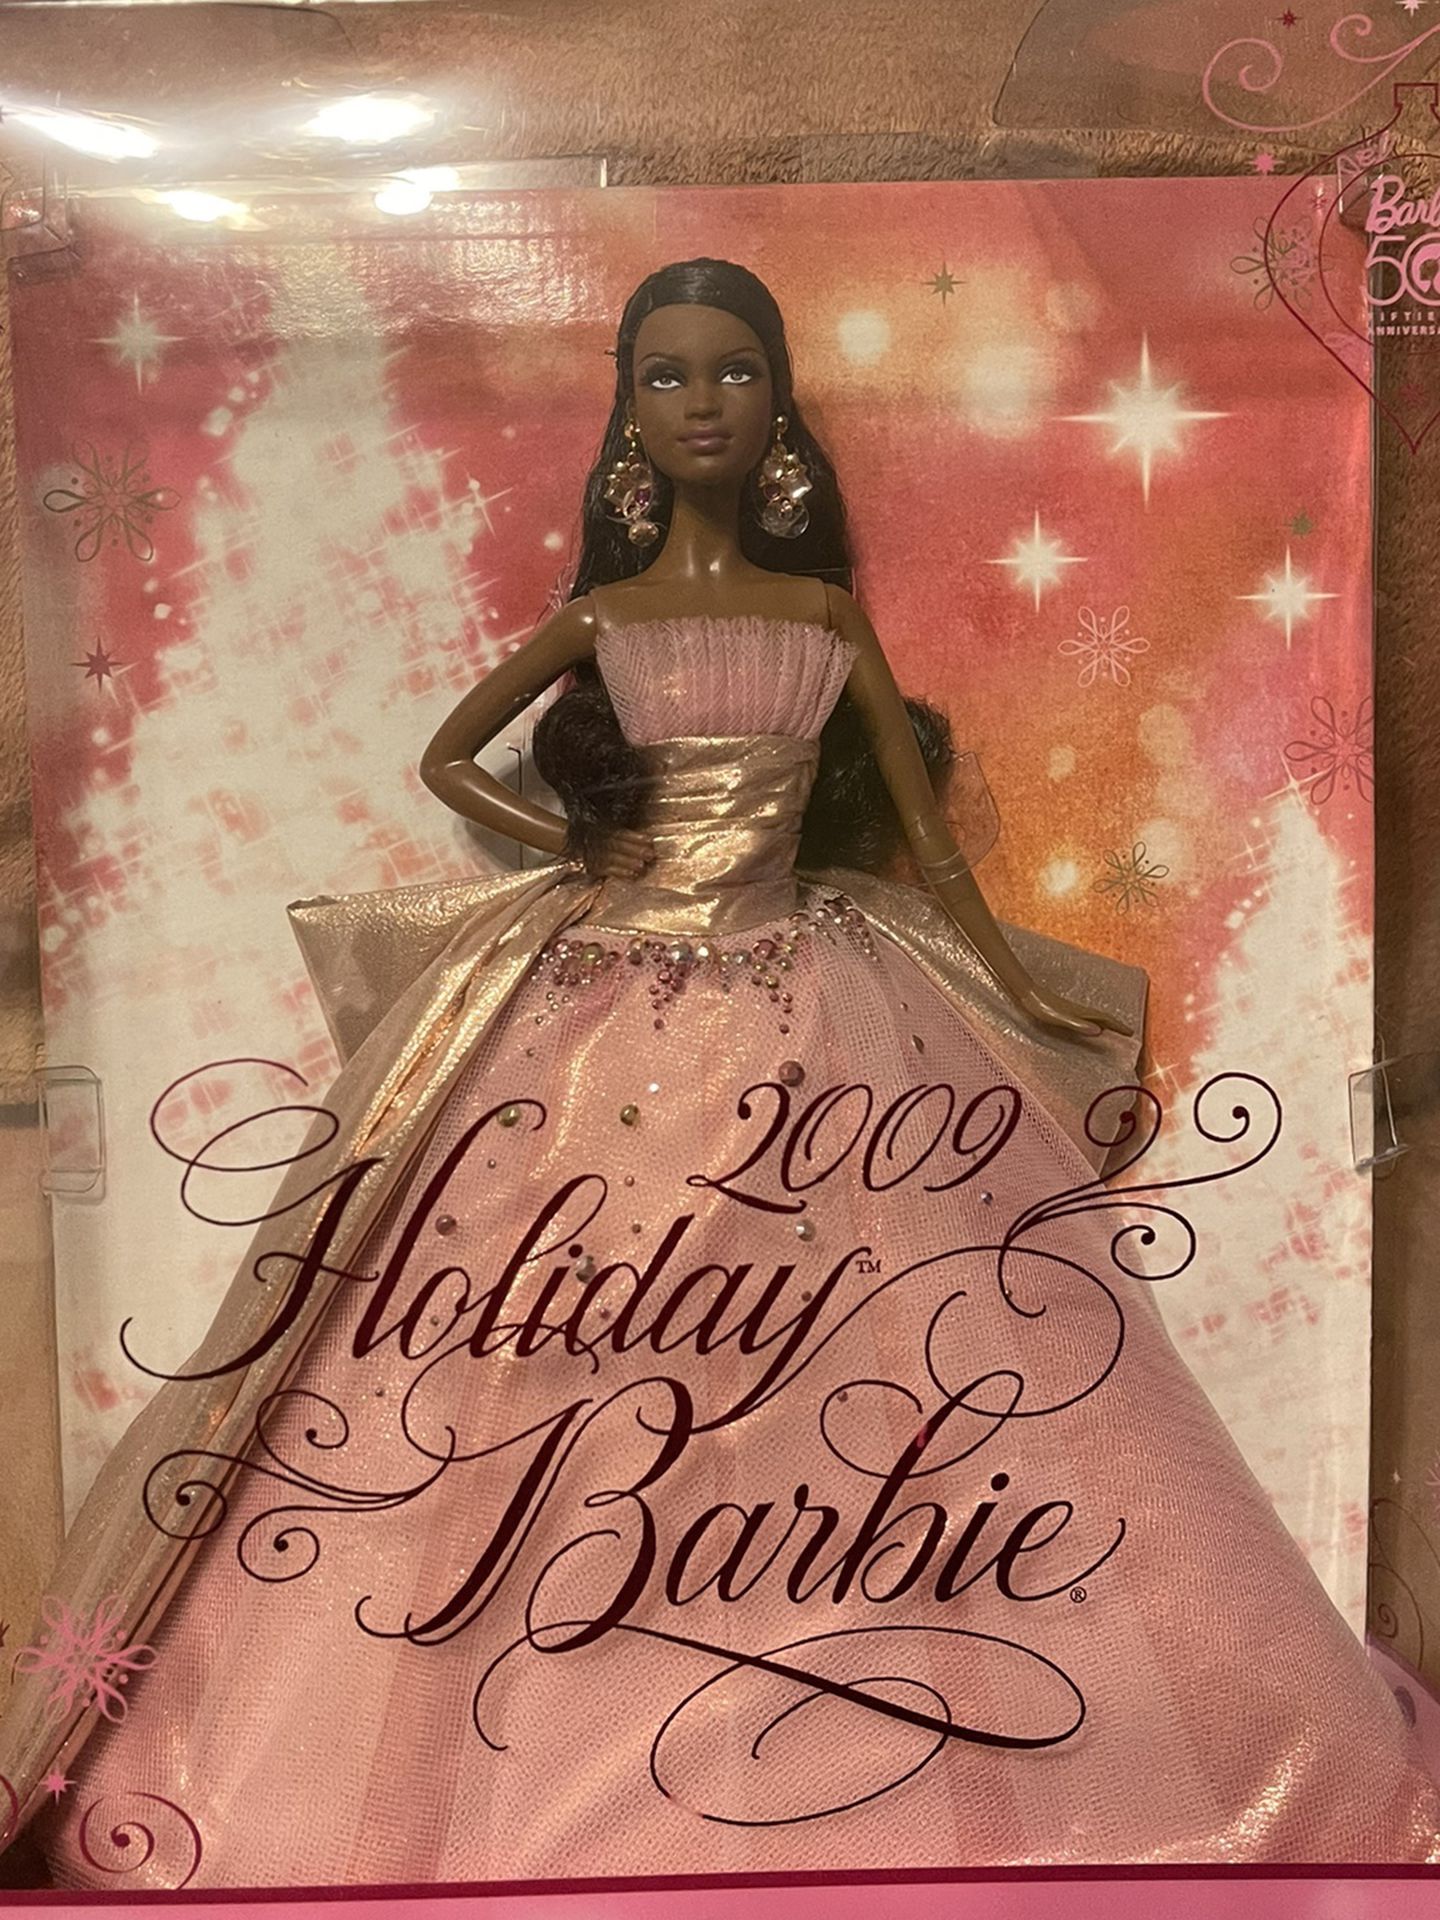 50th Anniversary Barbie Holiday 2009